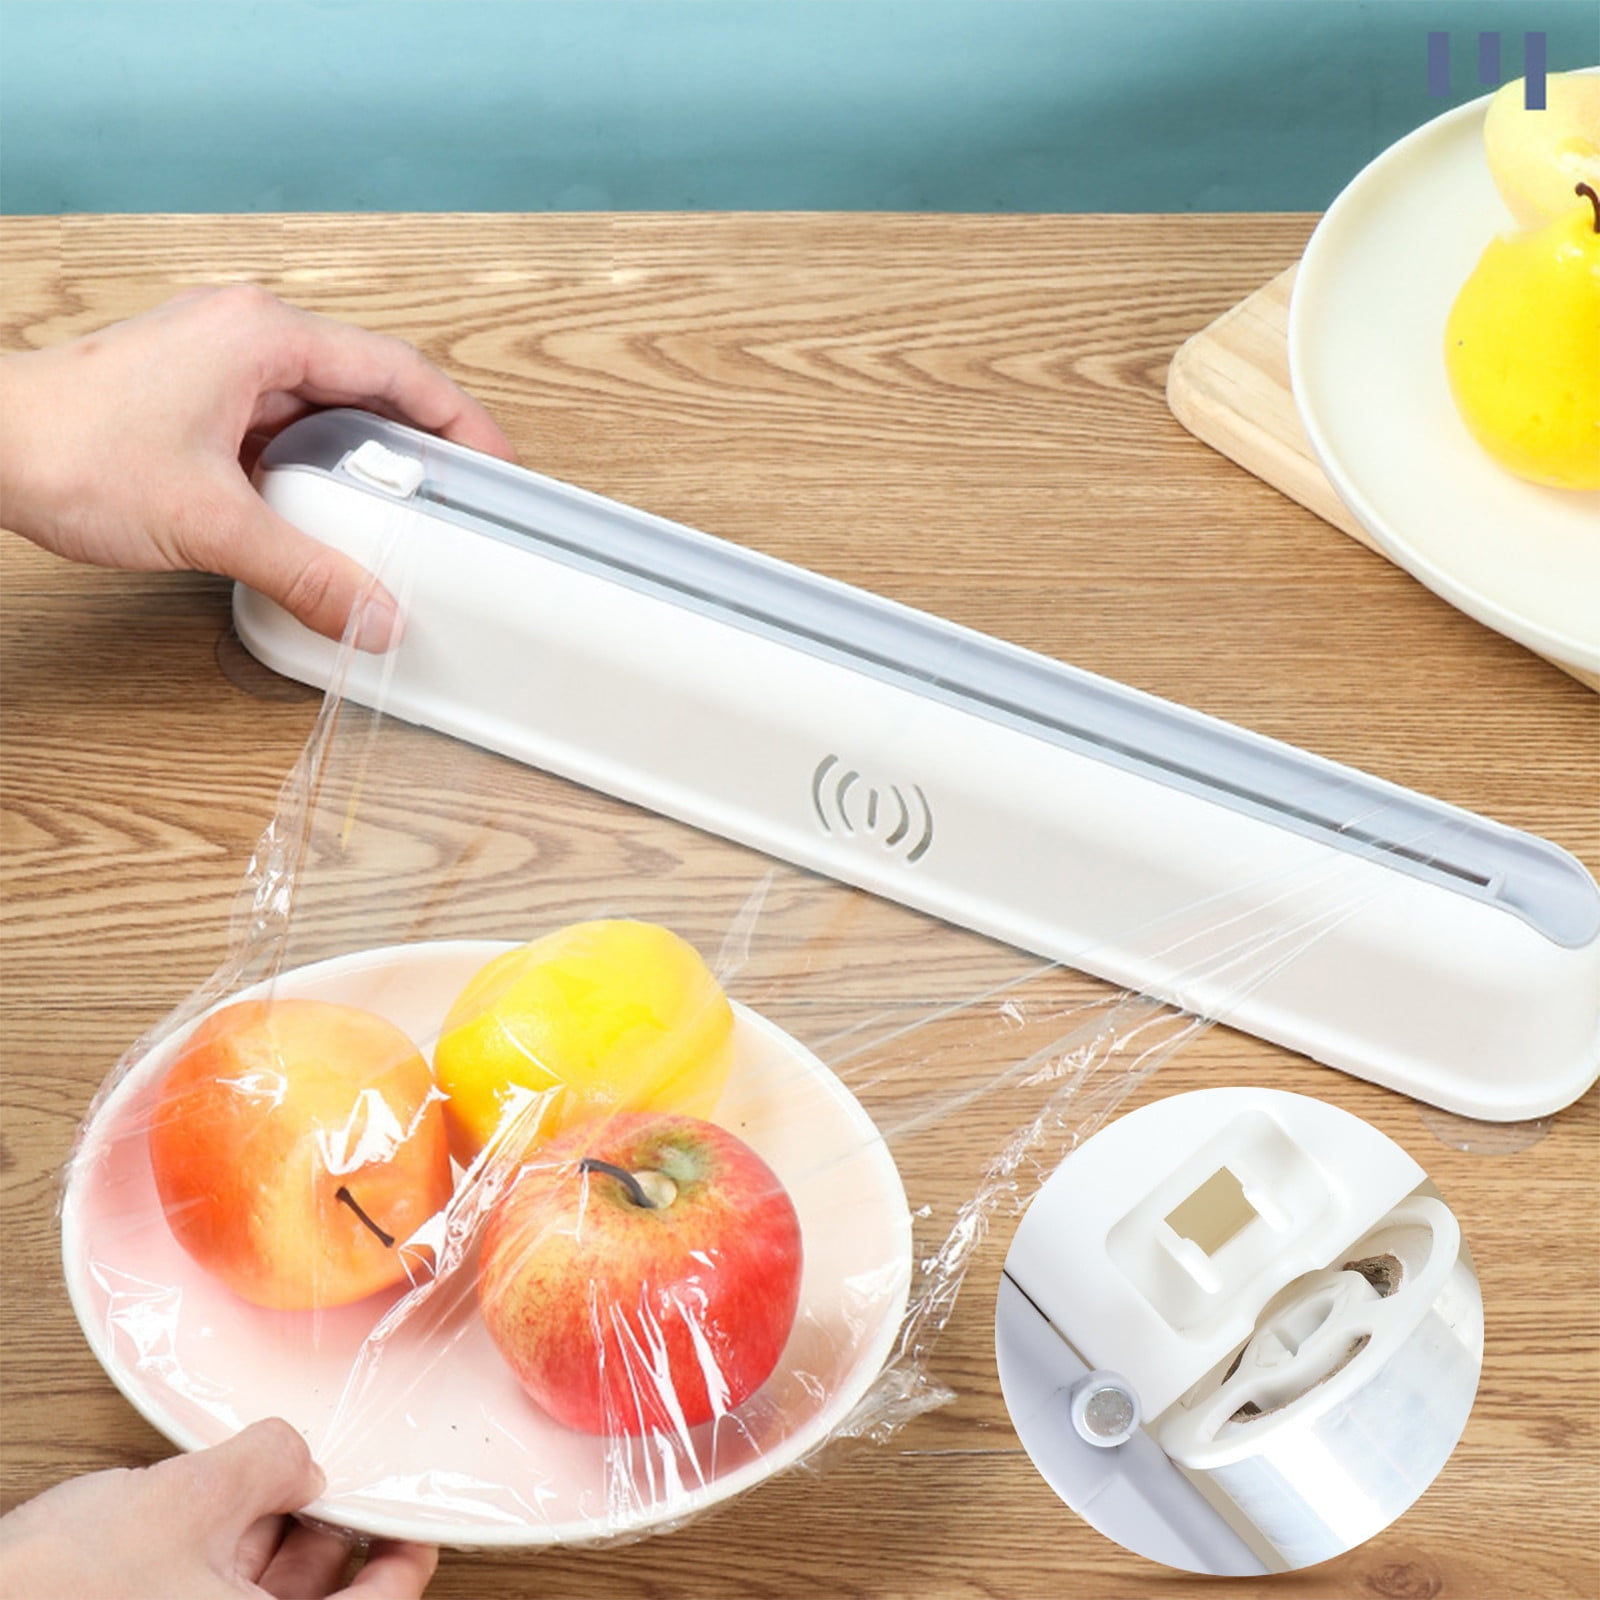 Viadha Kitchen Tools Cling Wrap Cutter - Household Tin Foil Cling Film Box  Cutting Artifact with Magnetic Suction Refrigerator Tray Cutting Box